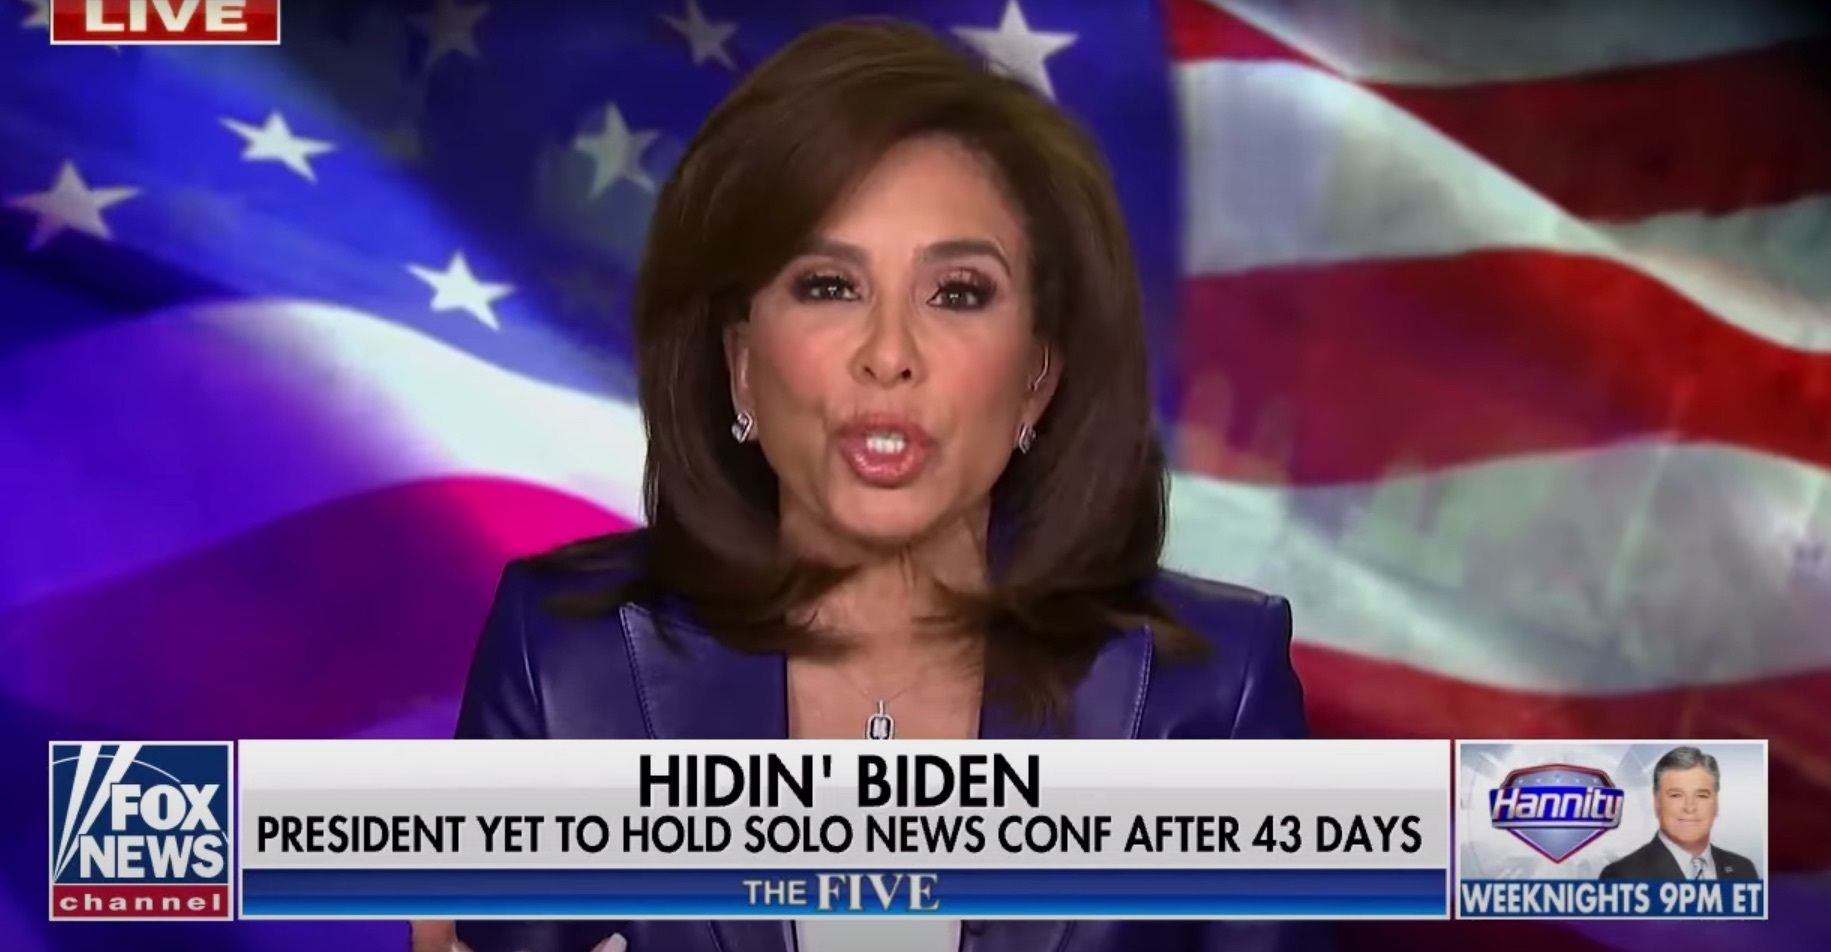 Jeanine Pirro's Unhinged Racist Rant: Immigrants Bring 'All Kinds Of Diseases'